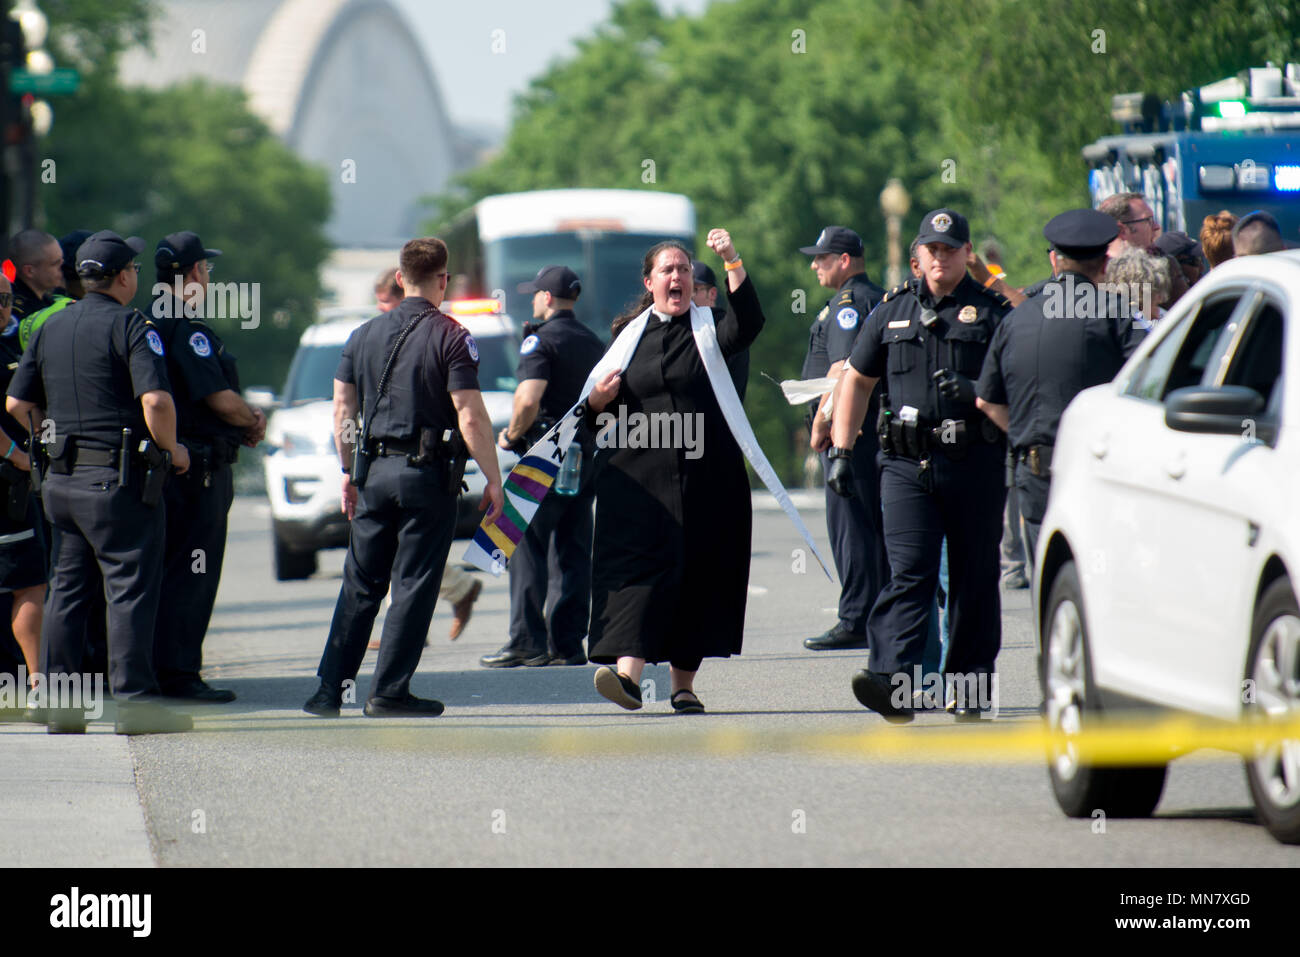 Washington, District of Columbia, USA. 14th May, 2018. Reverend Liz Theoharis leads hundreds of protesters with the Poor People's Campaign at the U.S. Capitol. Several dozen people were arrested and later released. Credit: Erin Scott/ZUMA Wire/Alamy Live News Stock Photo